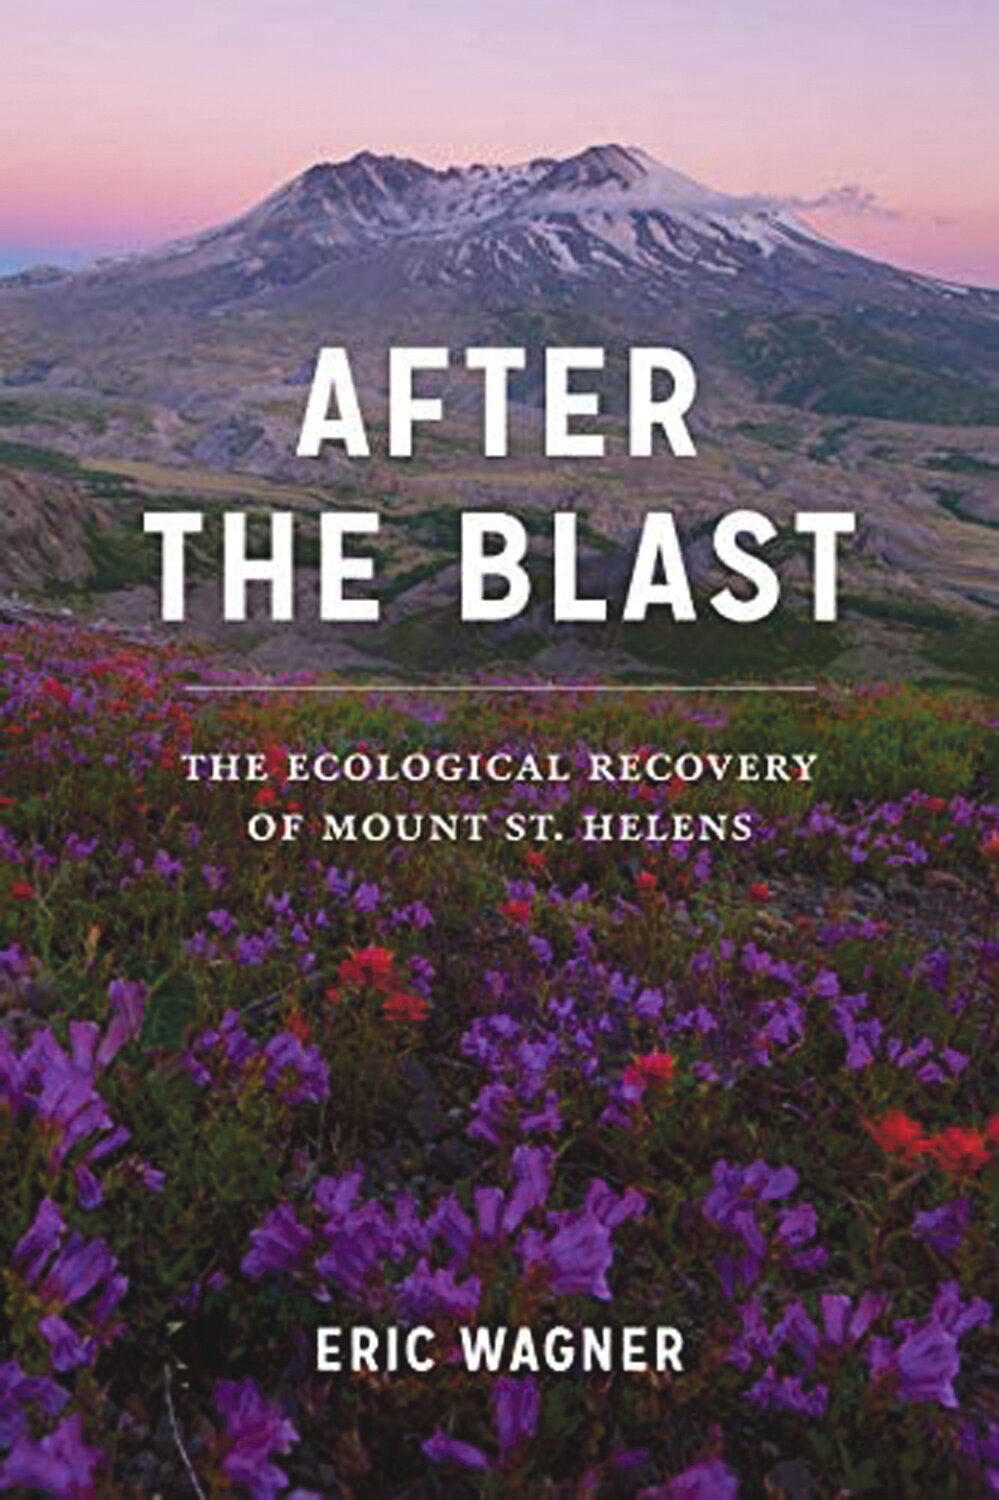 Eric Wagner, is a Seattle-based author whose published books include After the Blast: The Ecological Recovery of Mount St. Helens.